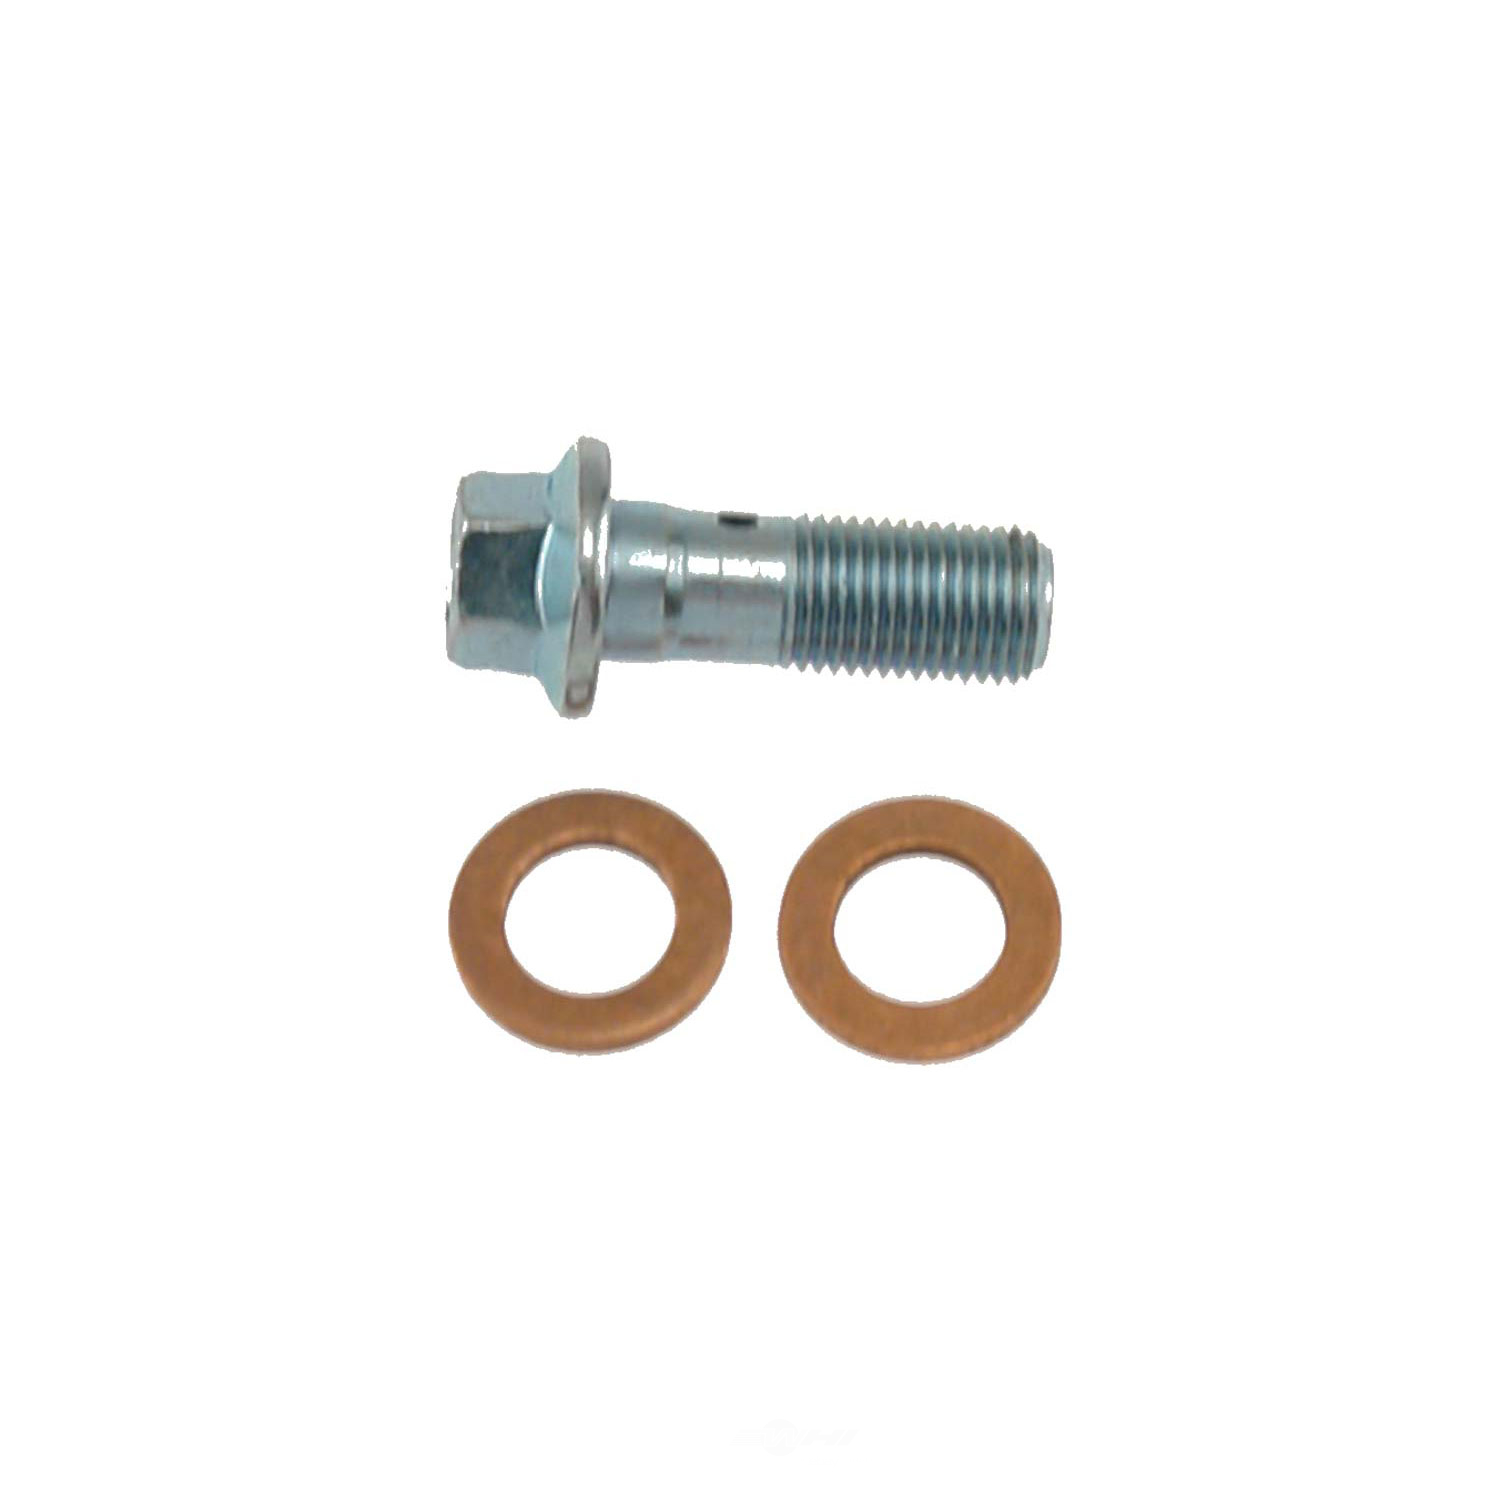 CARLSON QUALITY BRAKE PARTS - Contains 1 Bolt and 2 Washers (Rear) - CRL H9473